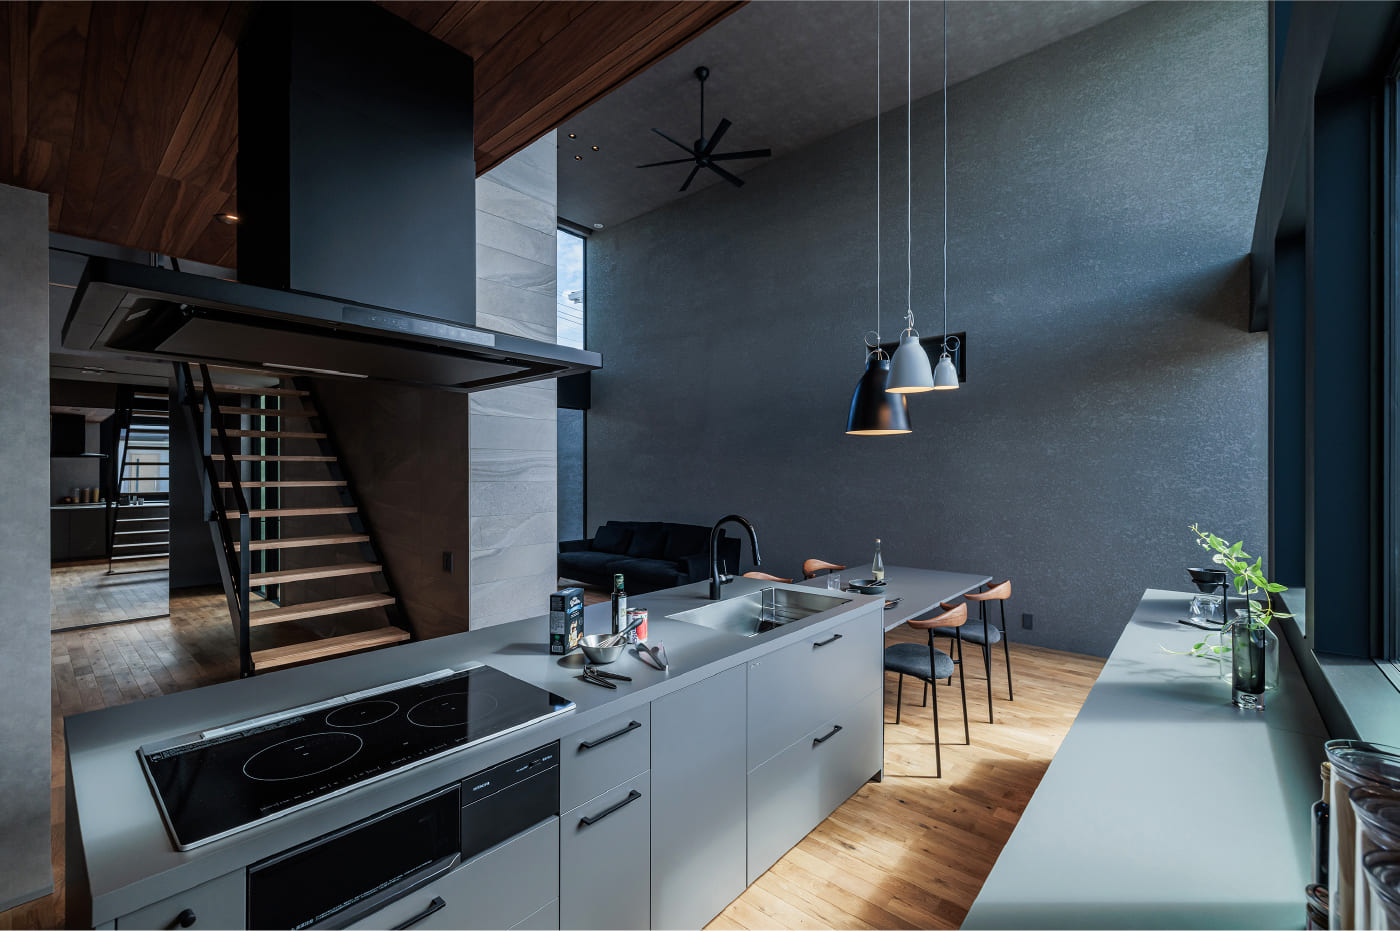 COOKING SPACE :